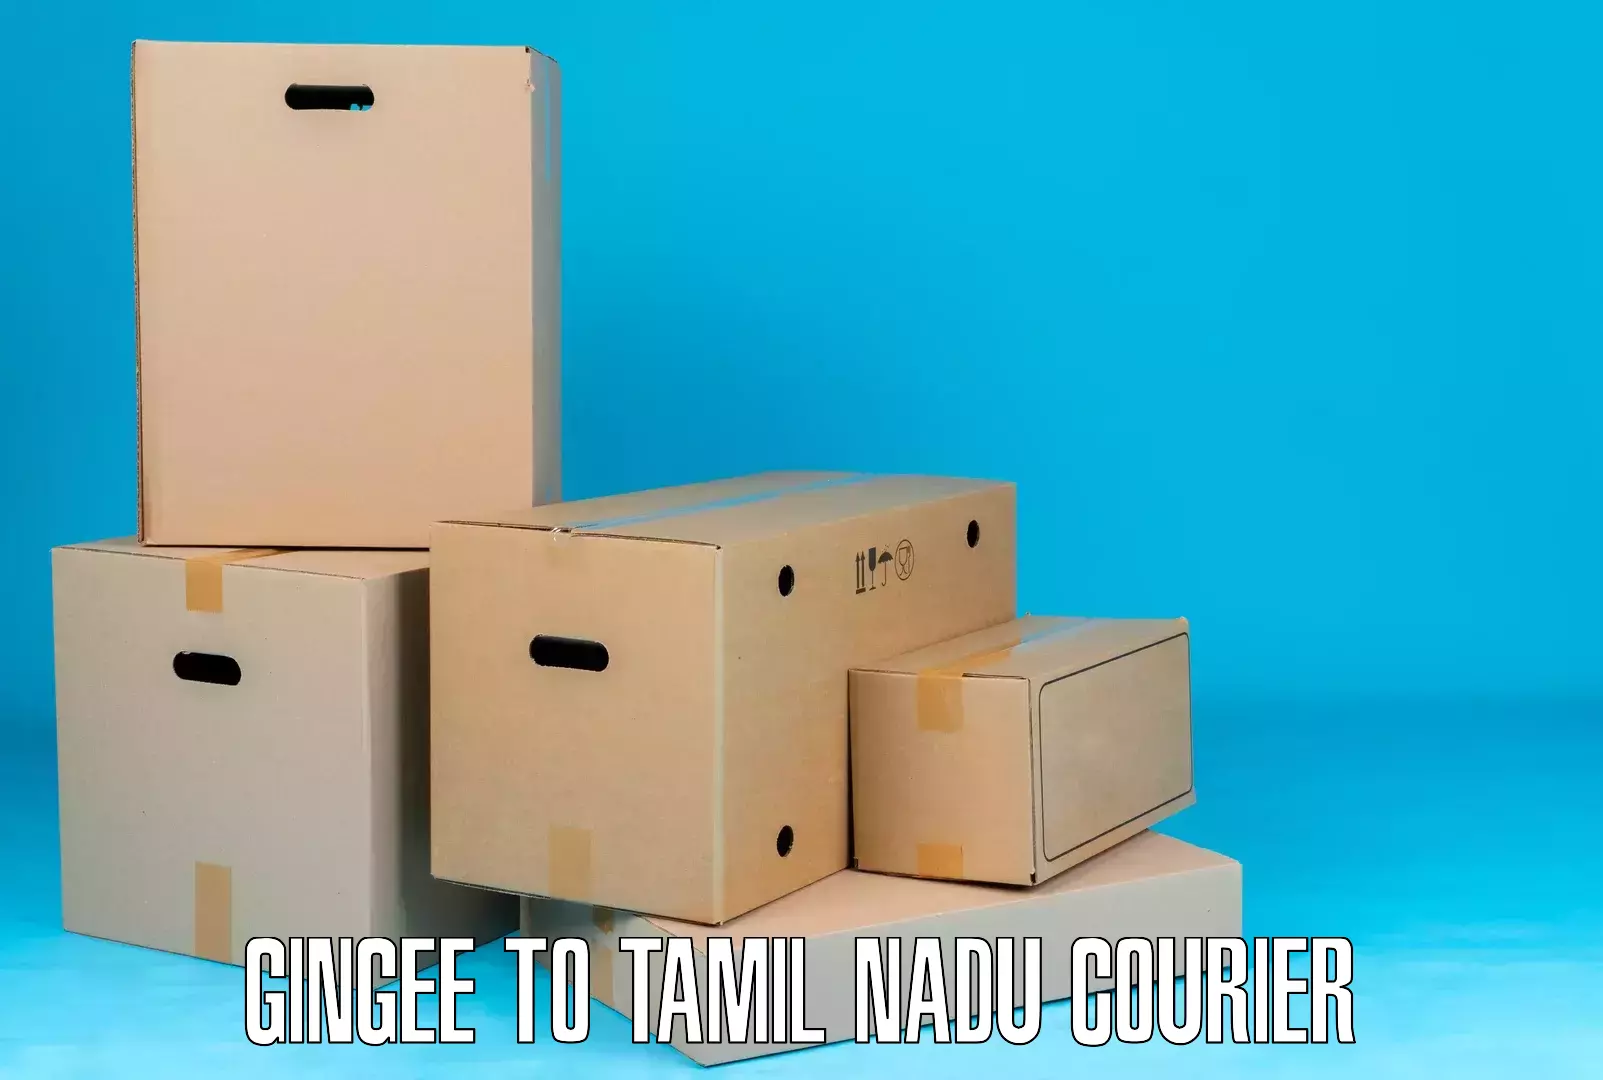 Package delivery network Gingee to Ayyampettai